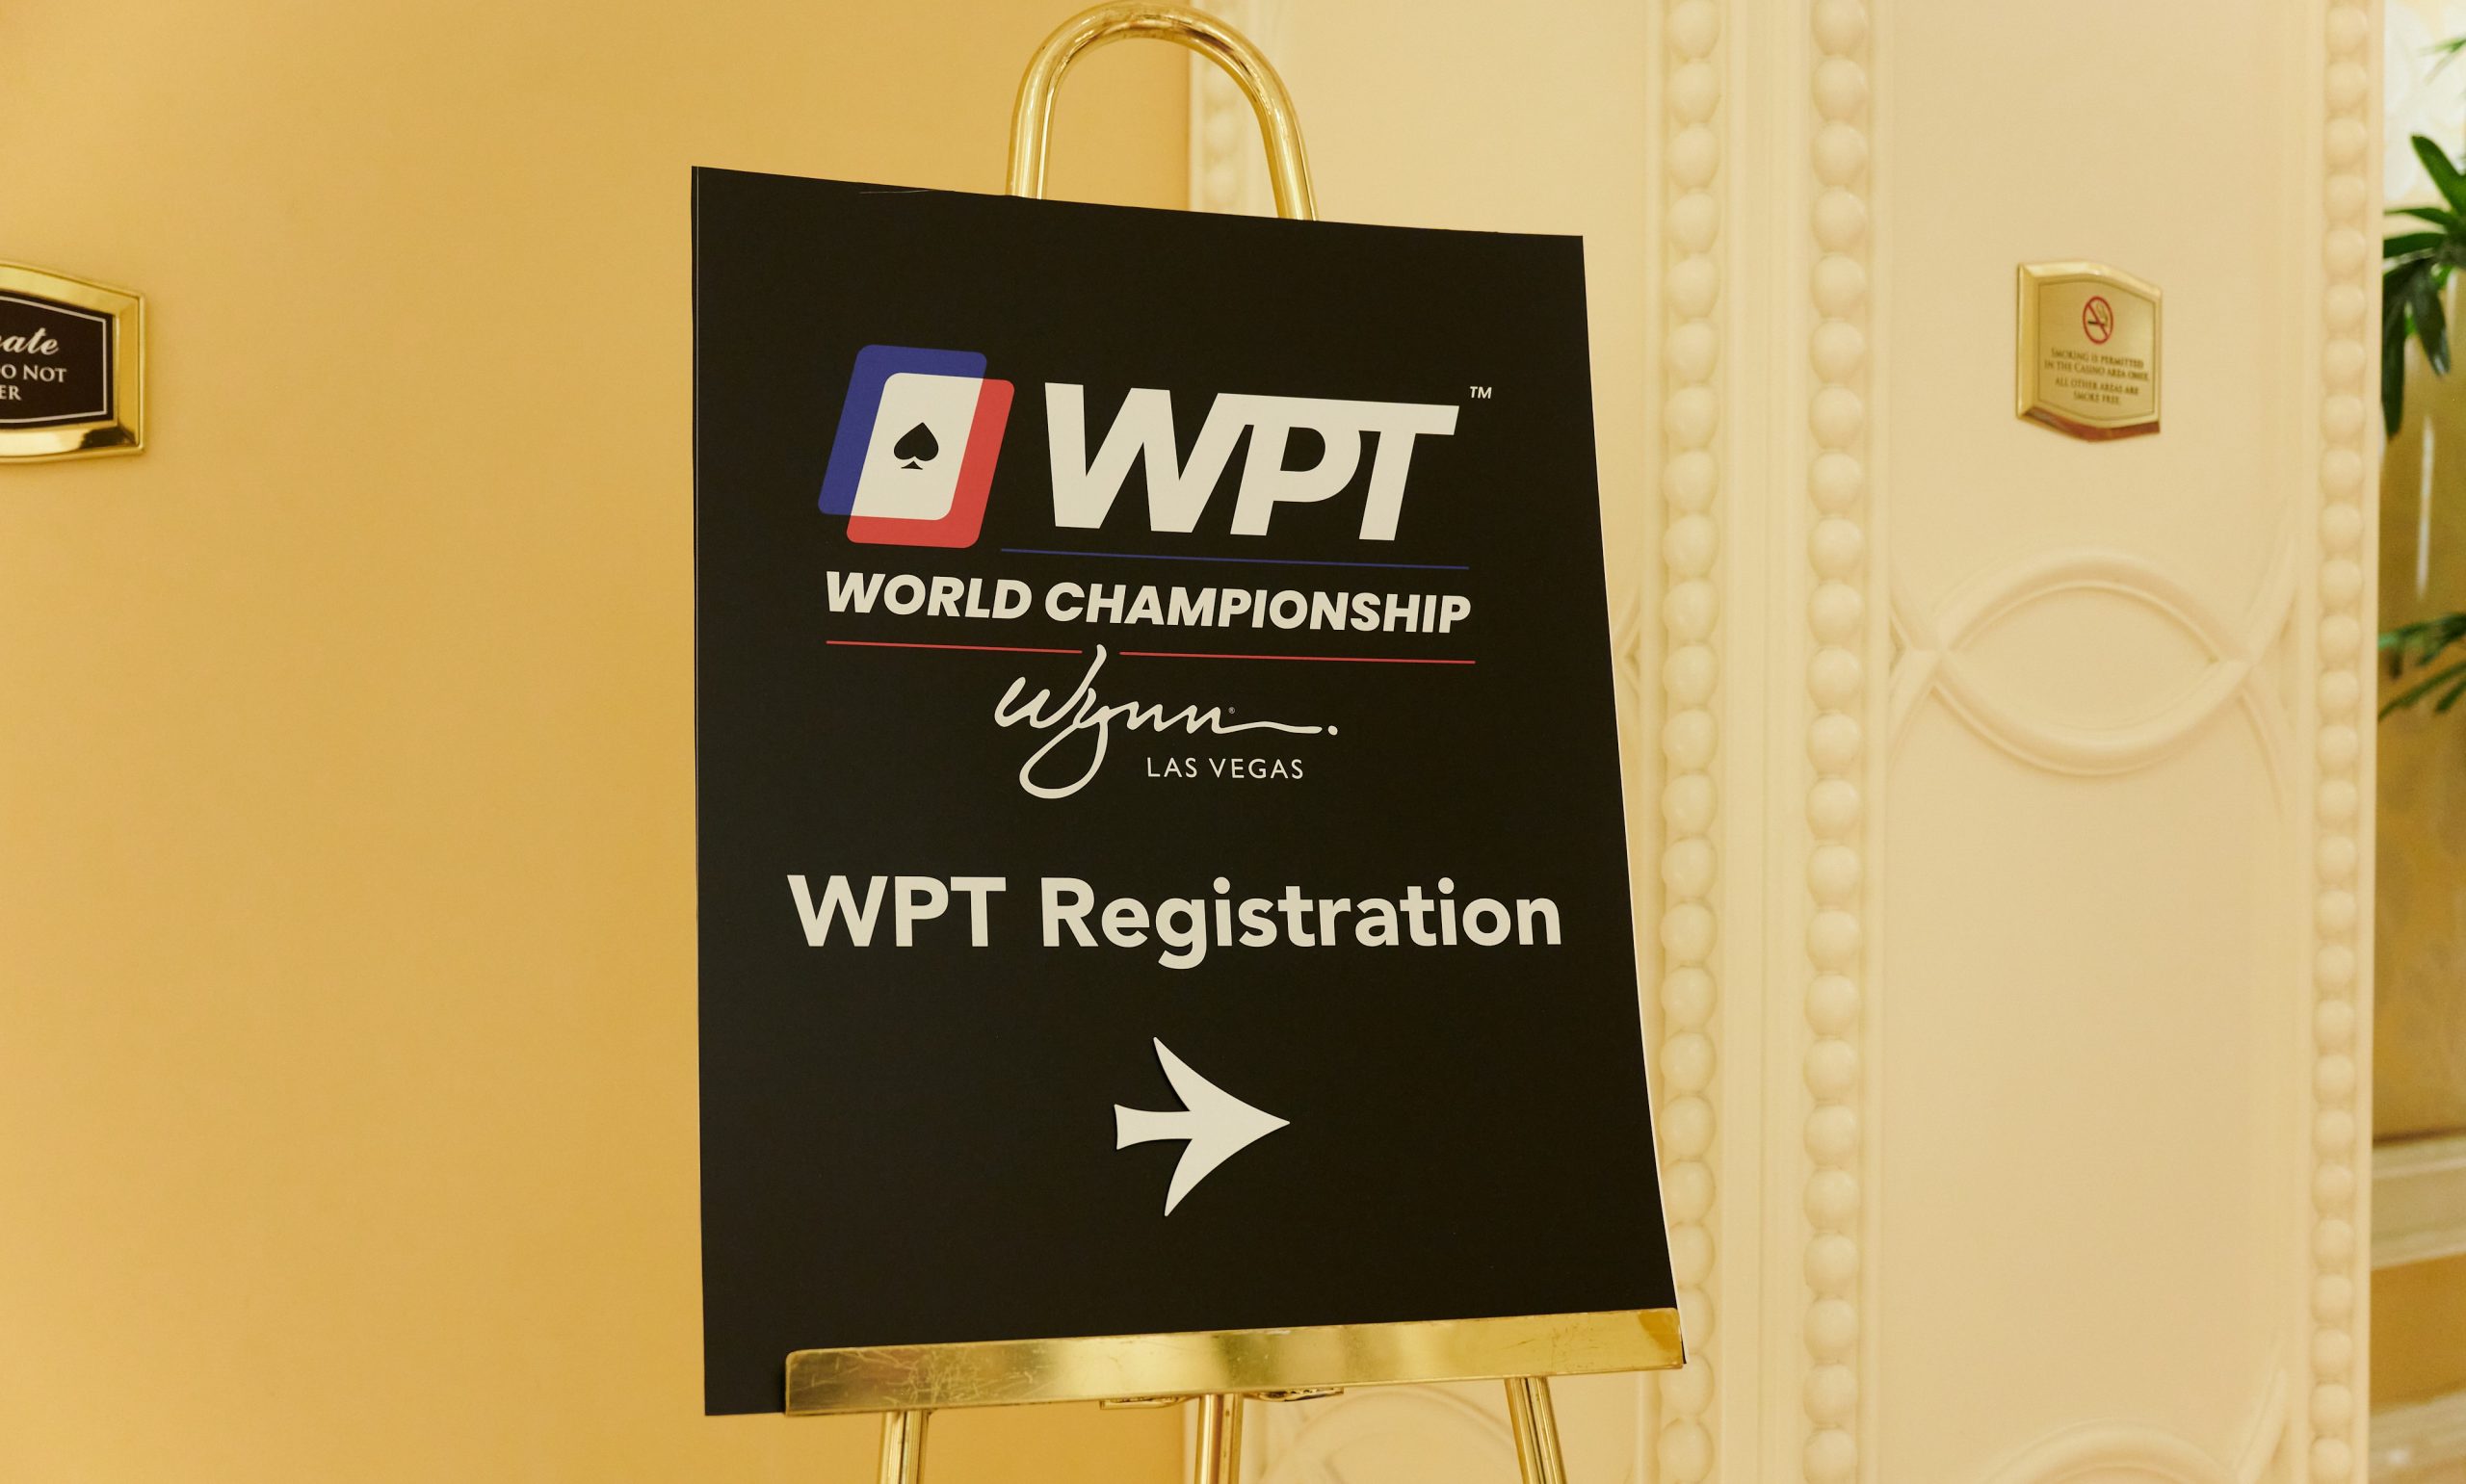 Dan’s WPT World Championship Diary #5: My Parting Shot (Why It Was Worth Playing)